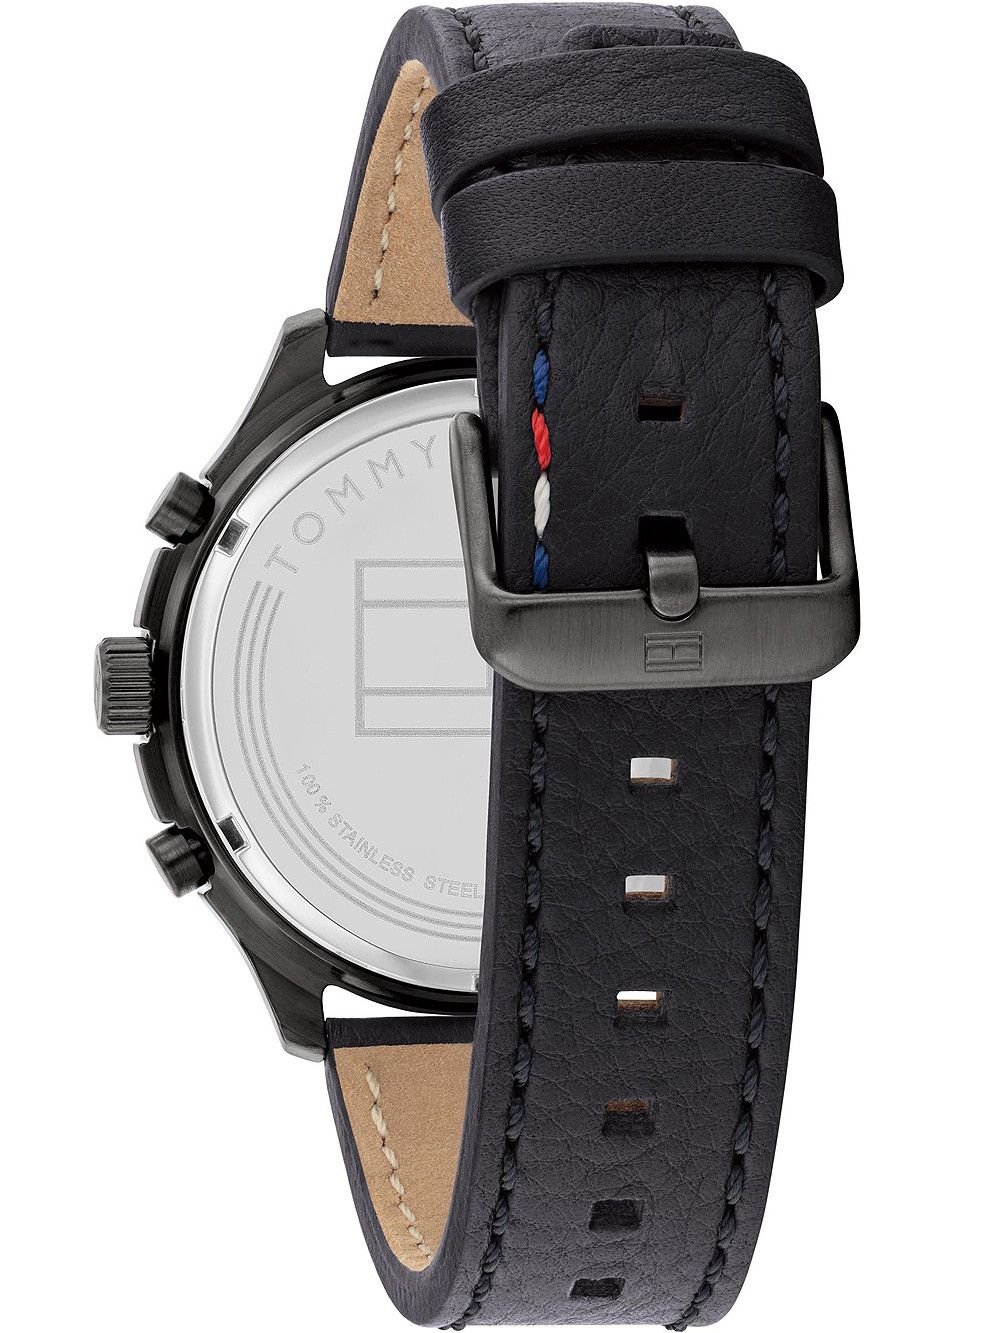 This Tommy Hilfiger Asher Multi Dial Watch for Men is the perfect timepiece to wear or to gift. It's Black 43 mm Round case combined with the comfortable Black Leather watch band will ensure you enjoy this stunning timepiece without any compromise. Operated by a high quality Quartz movement and water resistant to 5 bars, your watch will keep ticking. This classic watch gives a comfortable feeling with its leather strap, it's perfect for every occasion -The watch has a calendar function: Day-Date, 24-hour Display High quality 21 cm length and 20 mm width Black Leather strap with a Buckle Case diameter: 43 mm,case thickness: 11 mm, case colour: Black and dial colour: Black